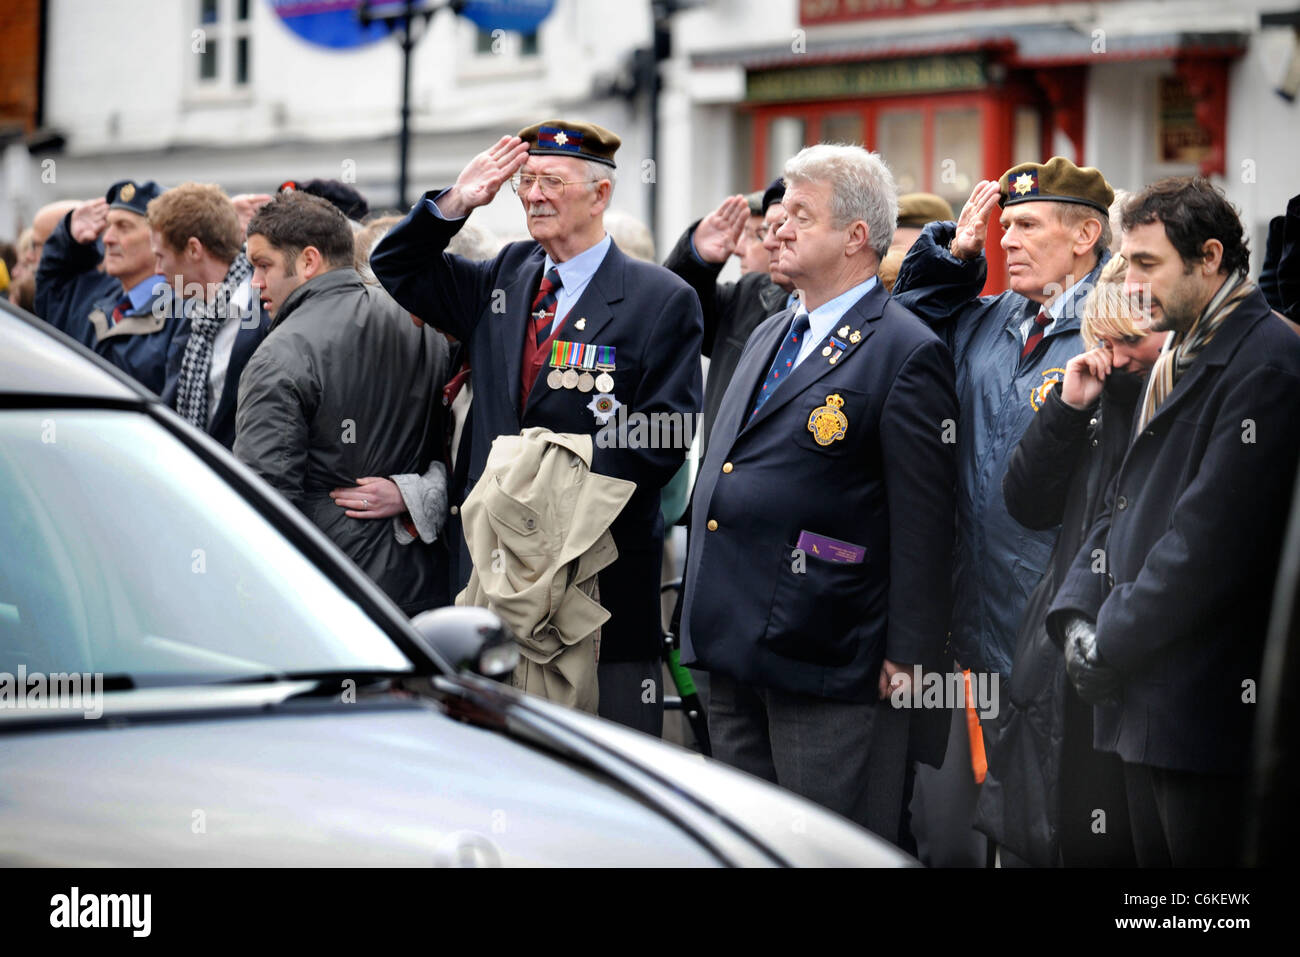 Military veterans amongst mourners gathered for a repatriation ceremony at Wootton Bassett, Wiltshire UK Dec 2008 Stock Photo